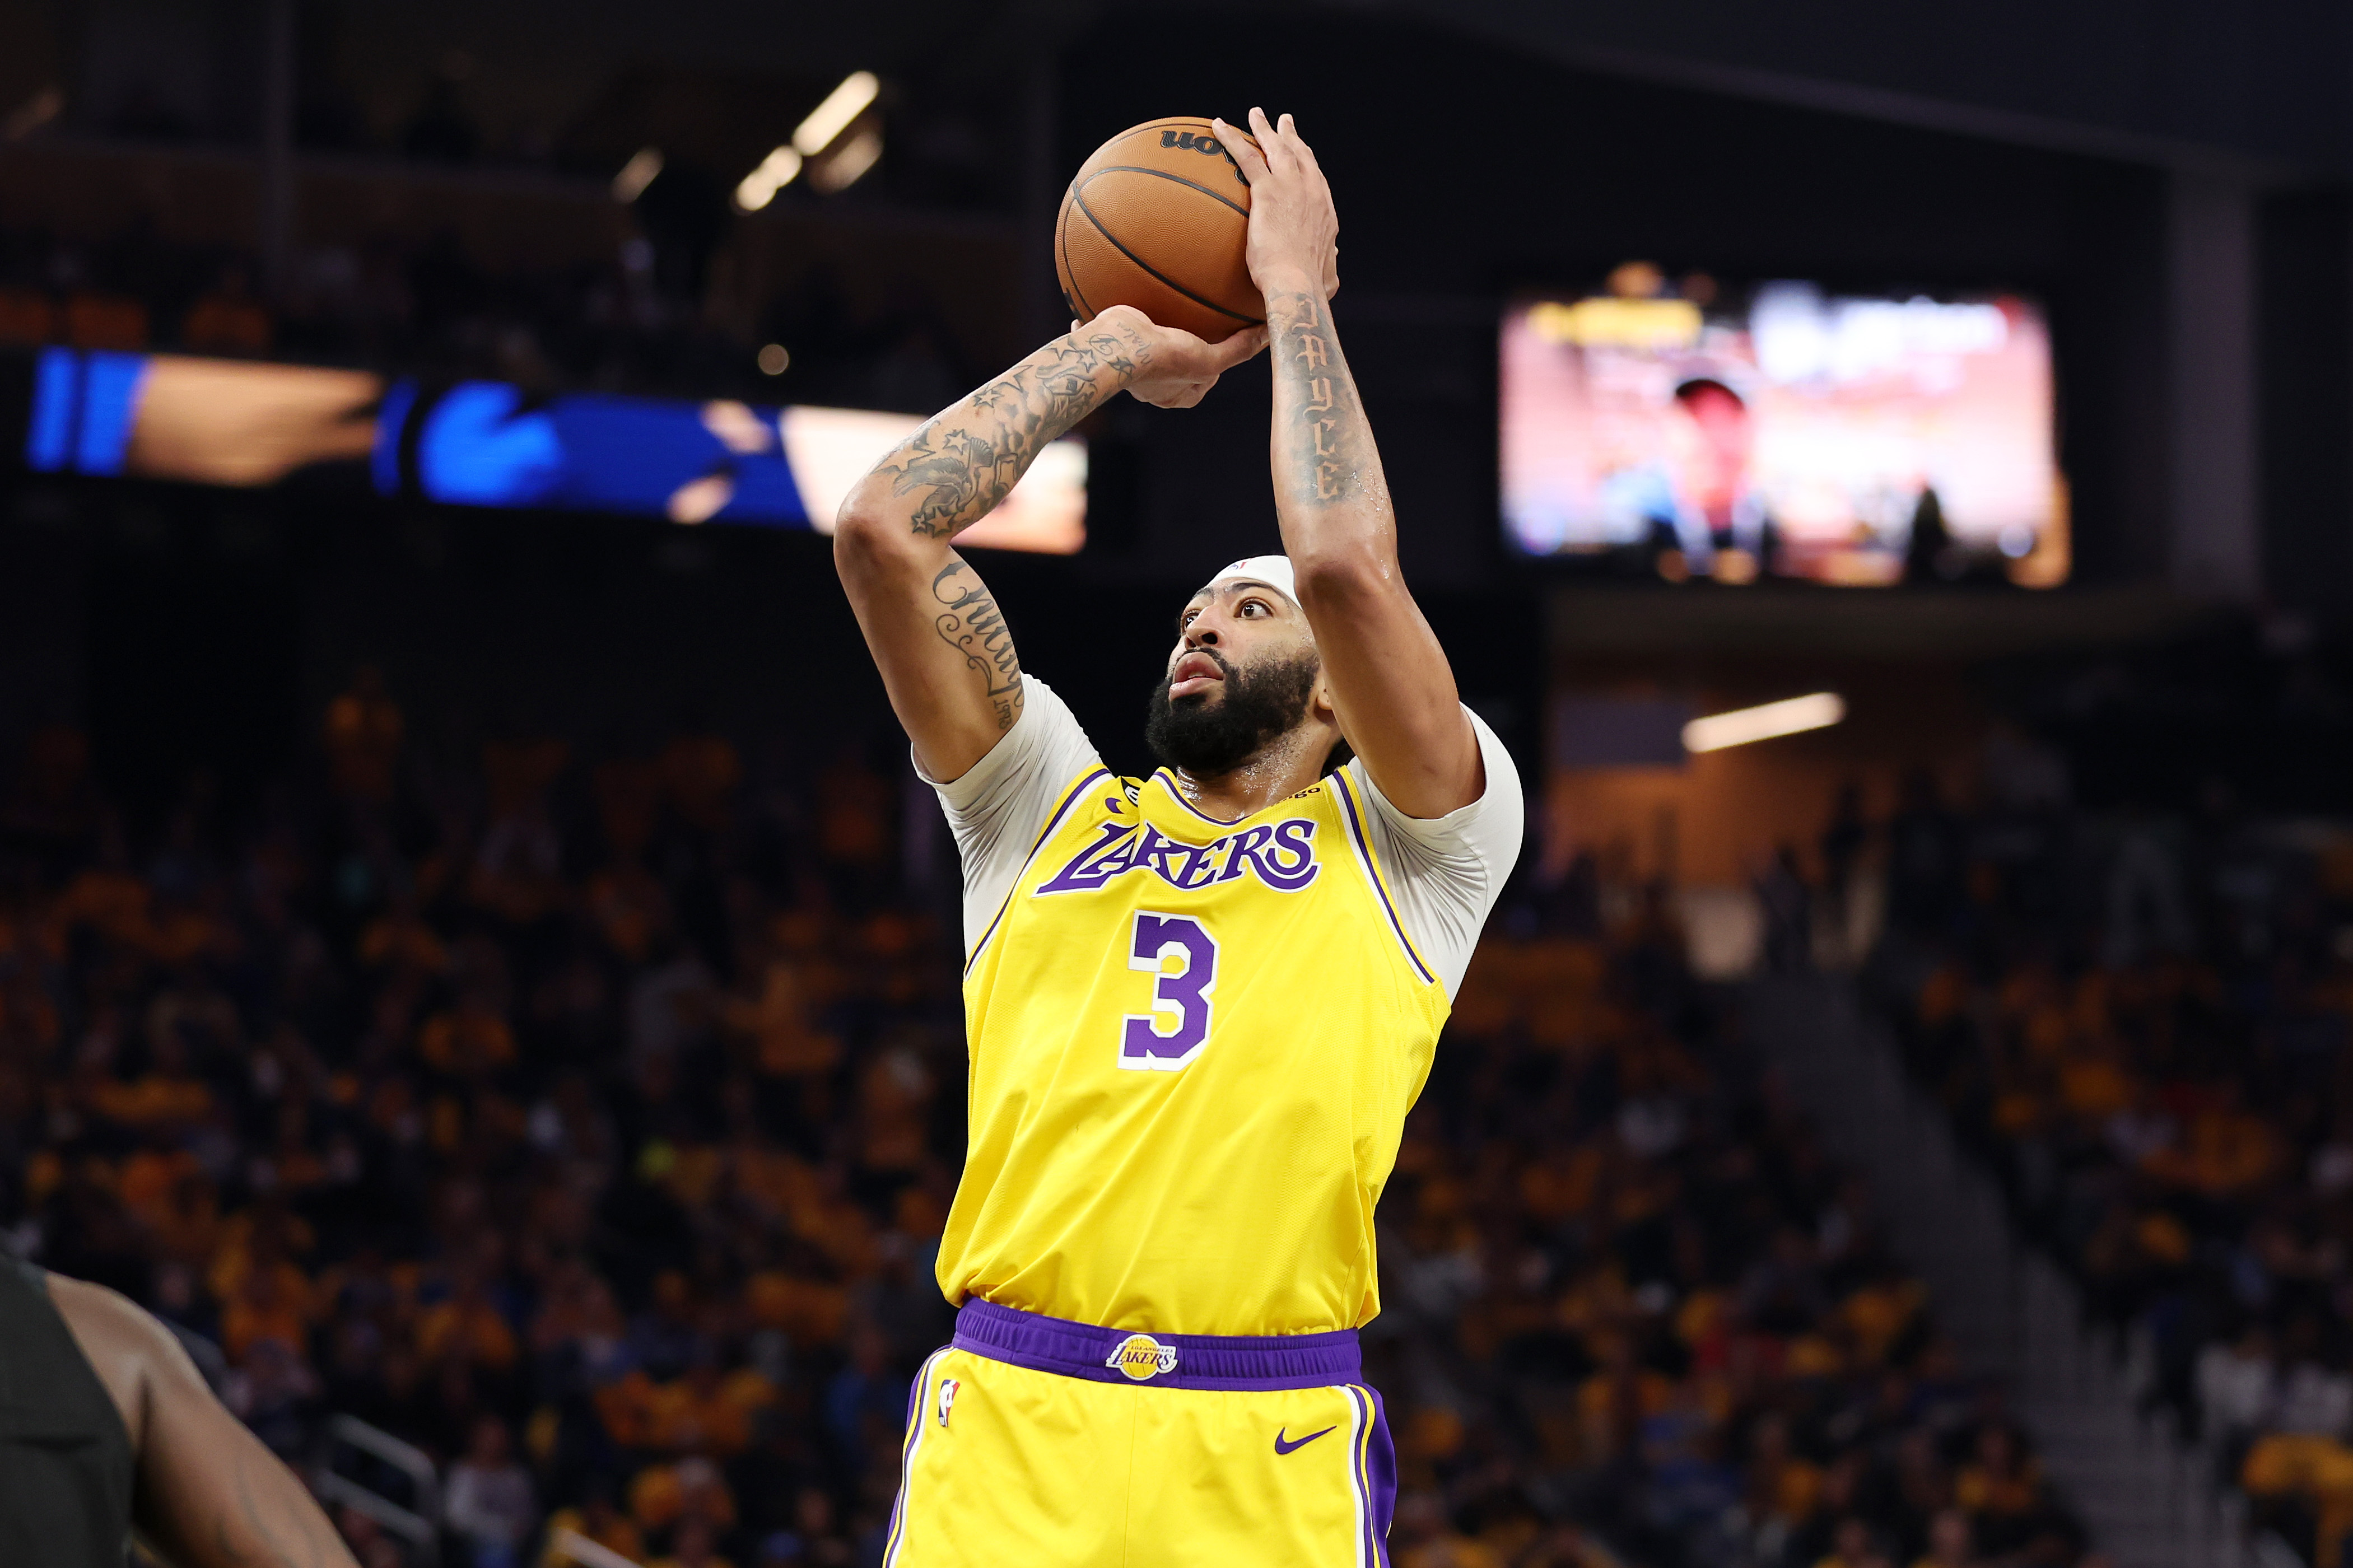 Golden State Warriors vs. Los Angeles Lakers odds, tips and betting trends, October 18